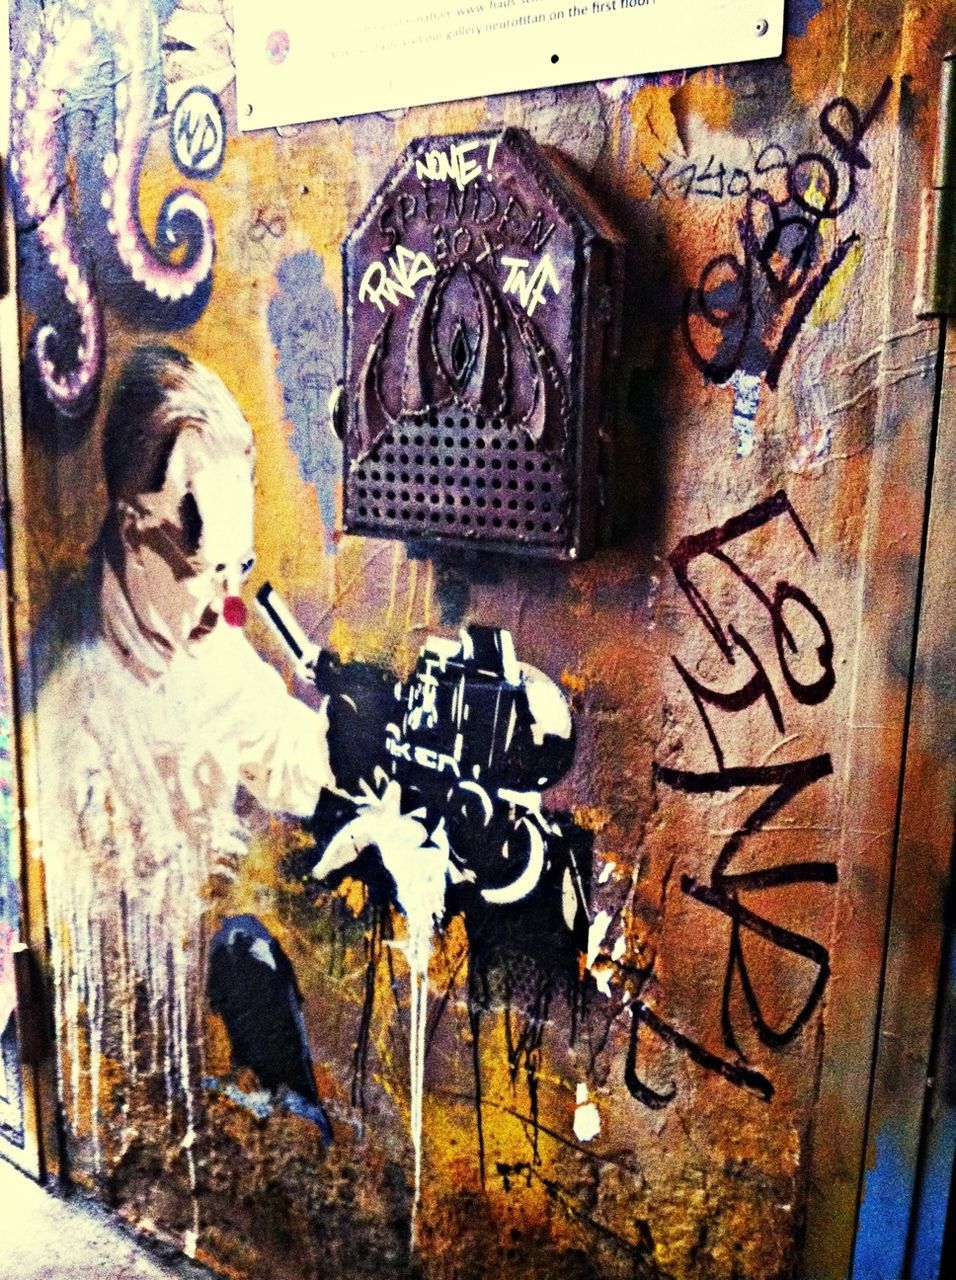 graffiti, art, art and craft, creativity, wall - building feature, indoors, old, built structure, text, architecture, human representation, wall, street art, close-up, damaged, weathered, deterioration, door, vandalism